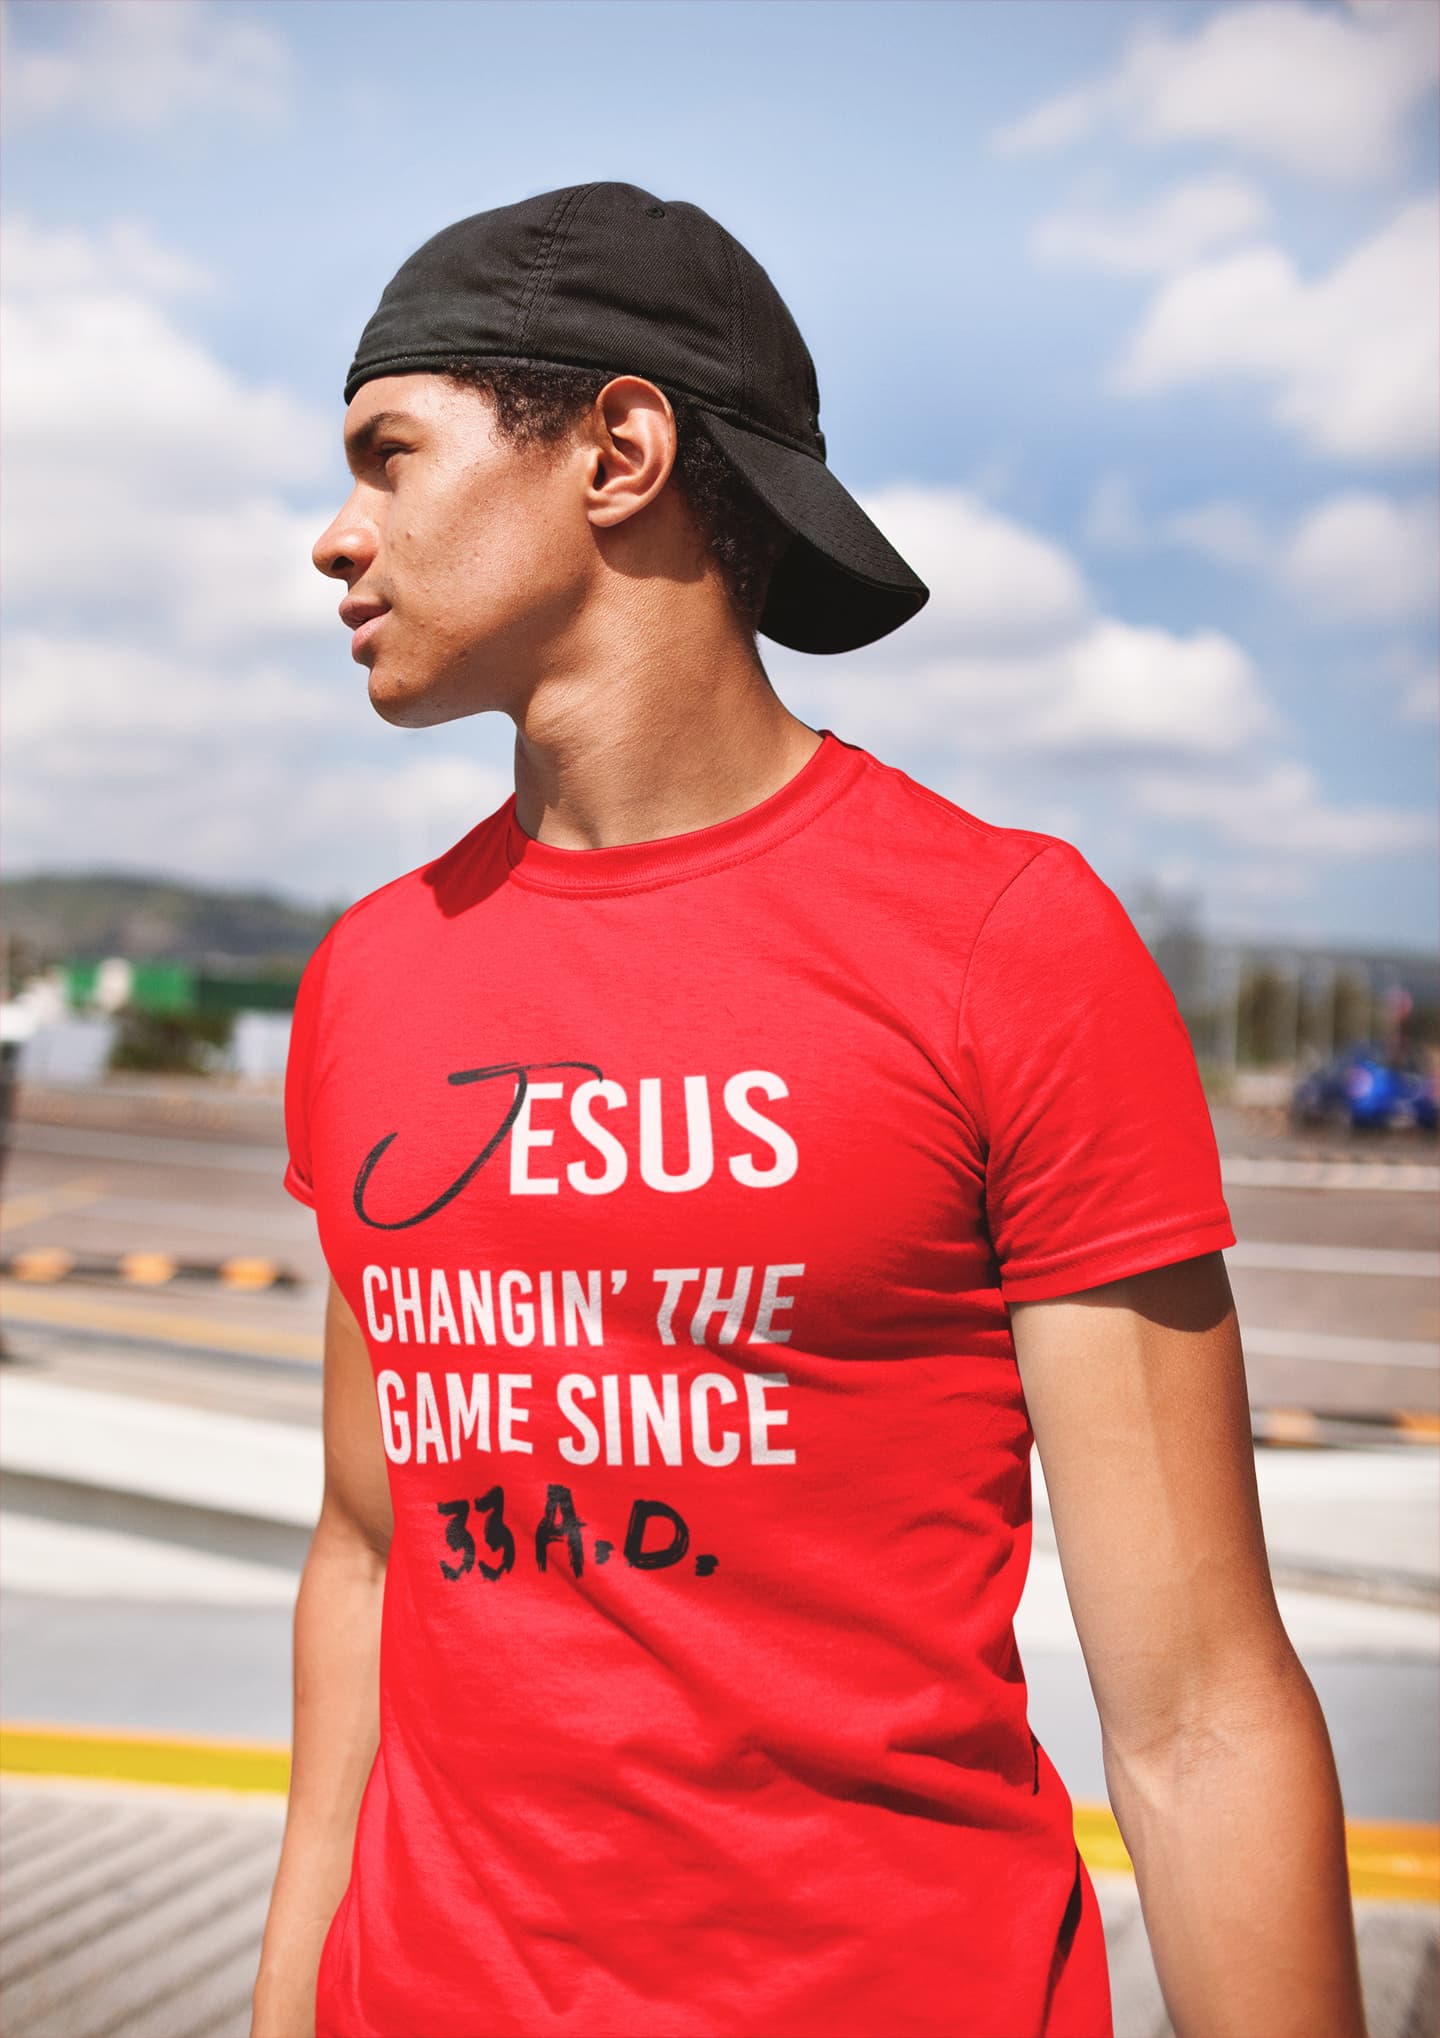 Man in Jesus Changin' The Game Since AD 33 t-shirt